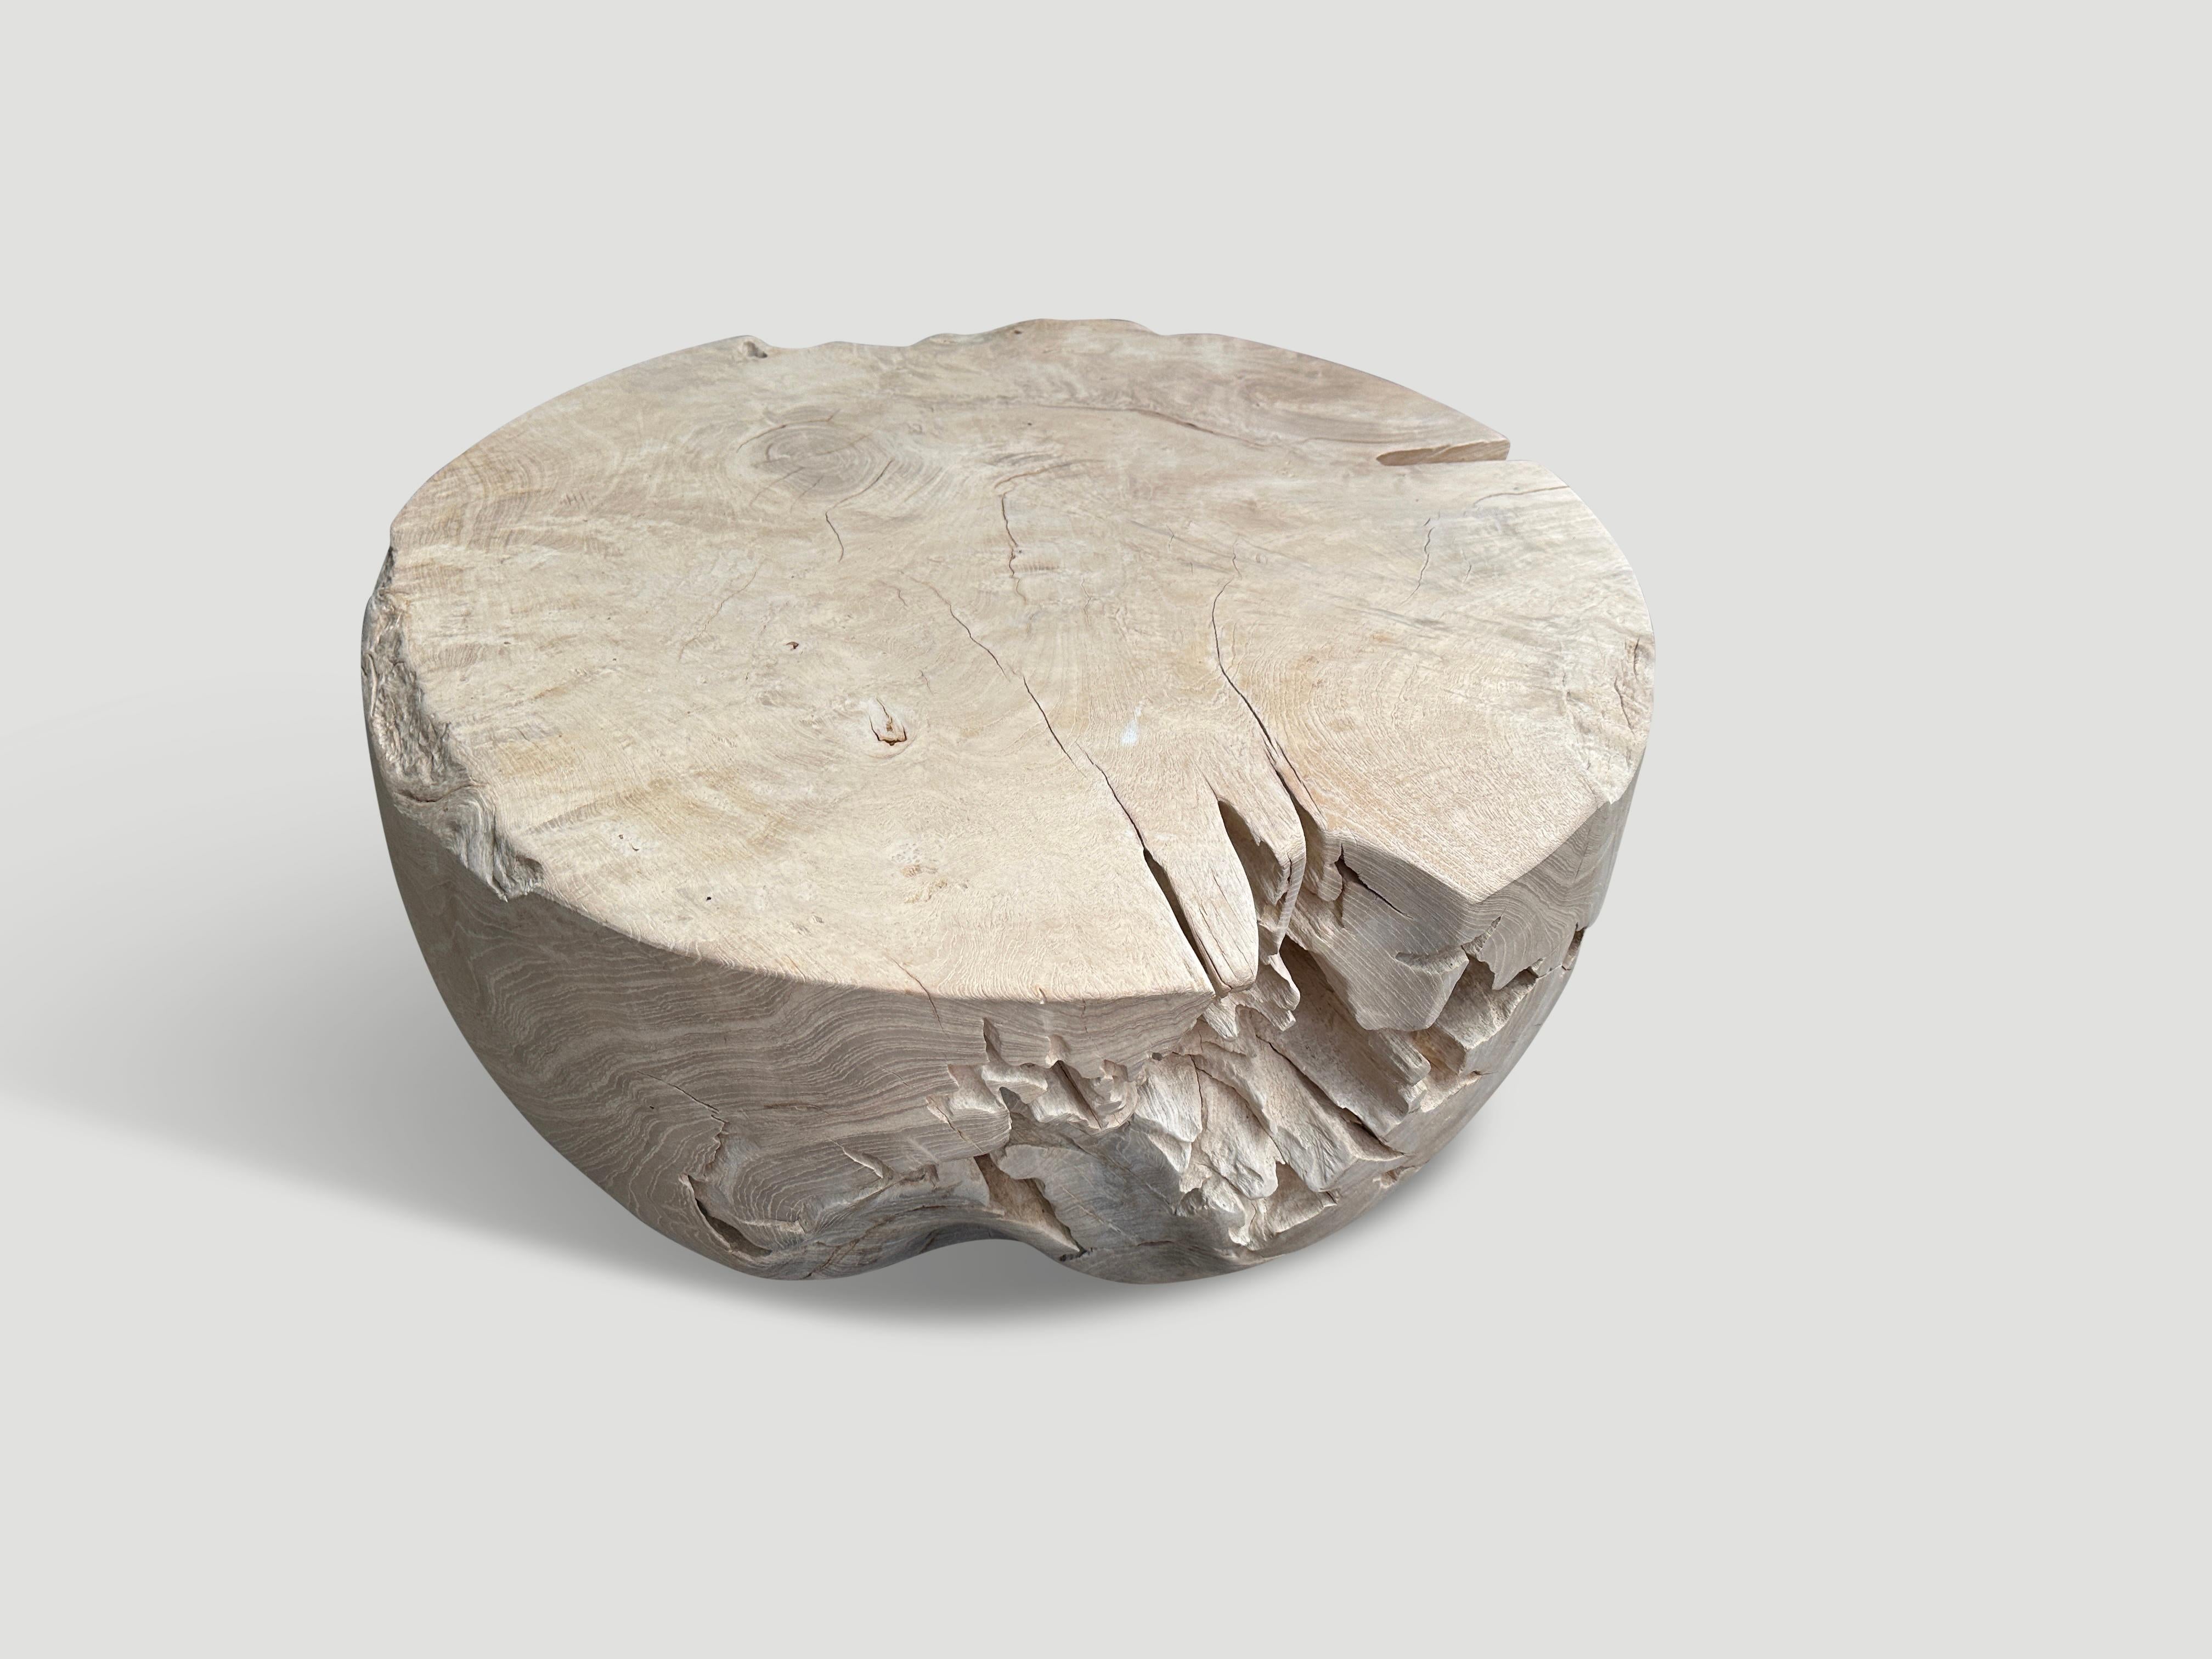 Reclaimed teak root coffee table hand carved into a drum shape whilst respecting the natural organic wood. We added a light white wash revealing the beautiful wood grain.

The St. Barts Collection features an exciting line of organic white wash,